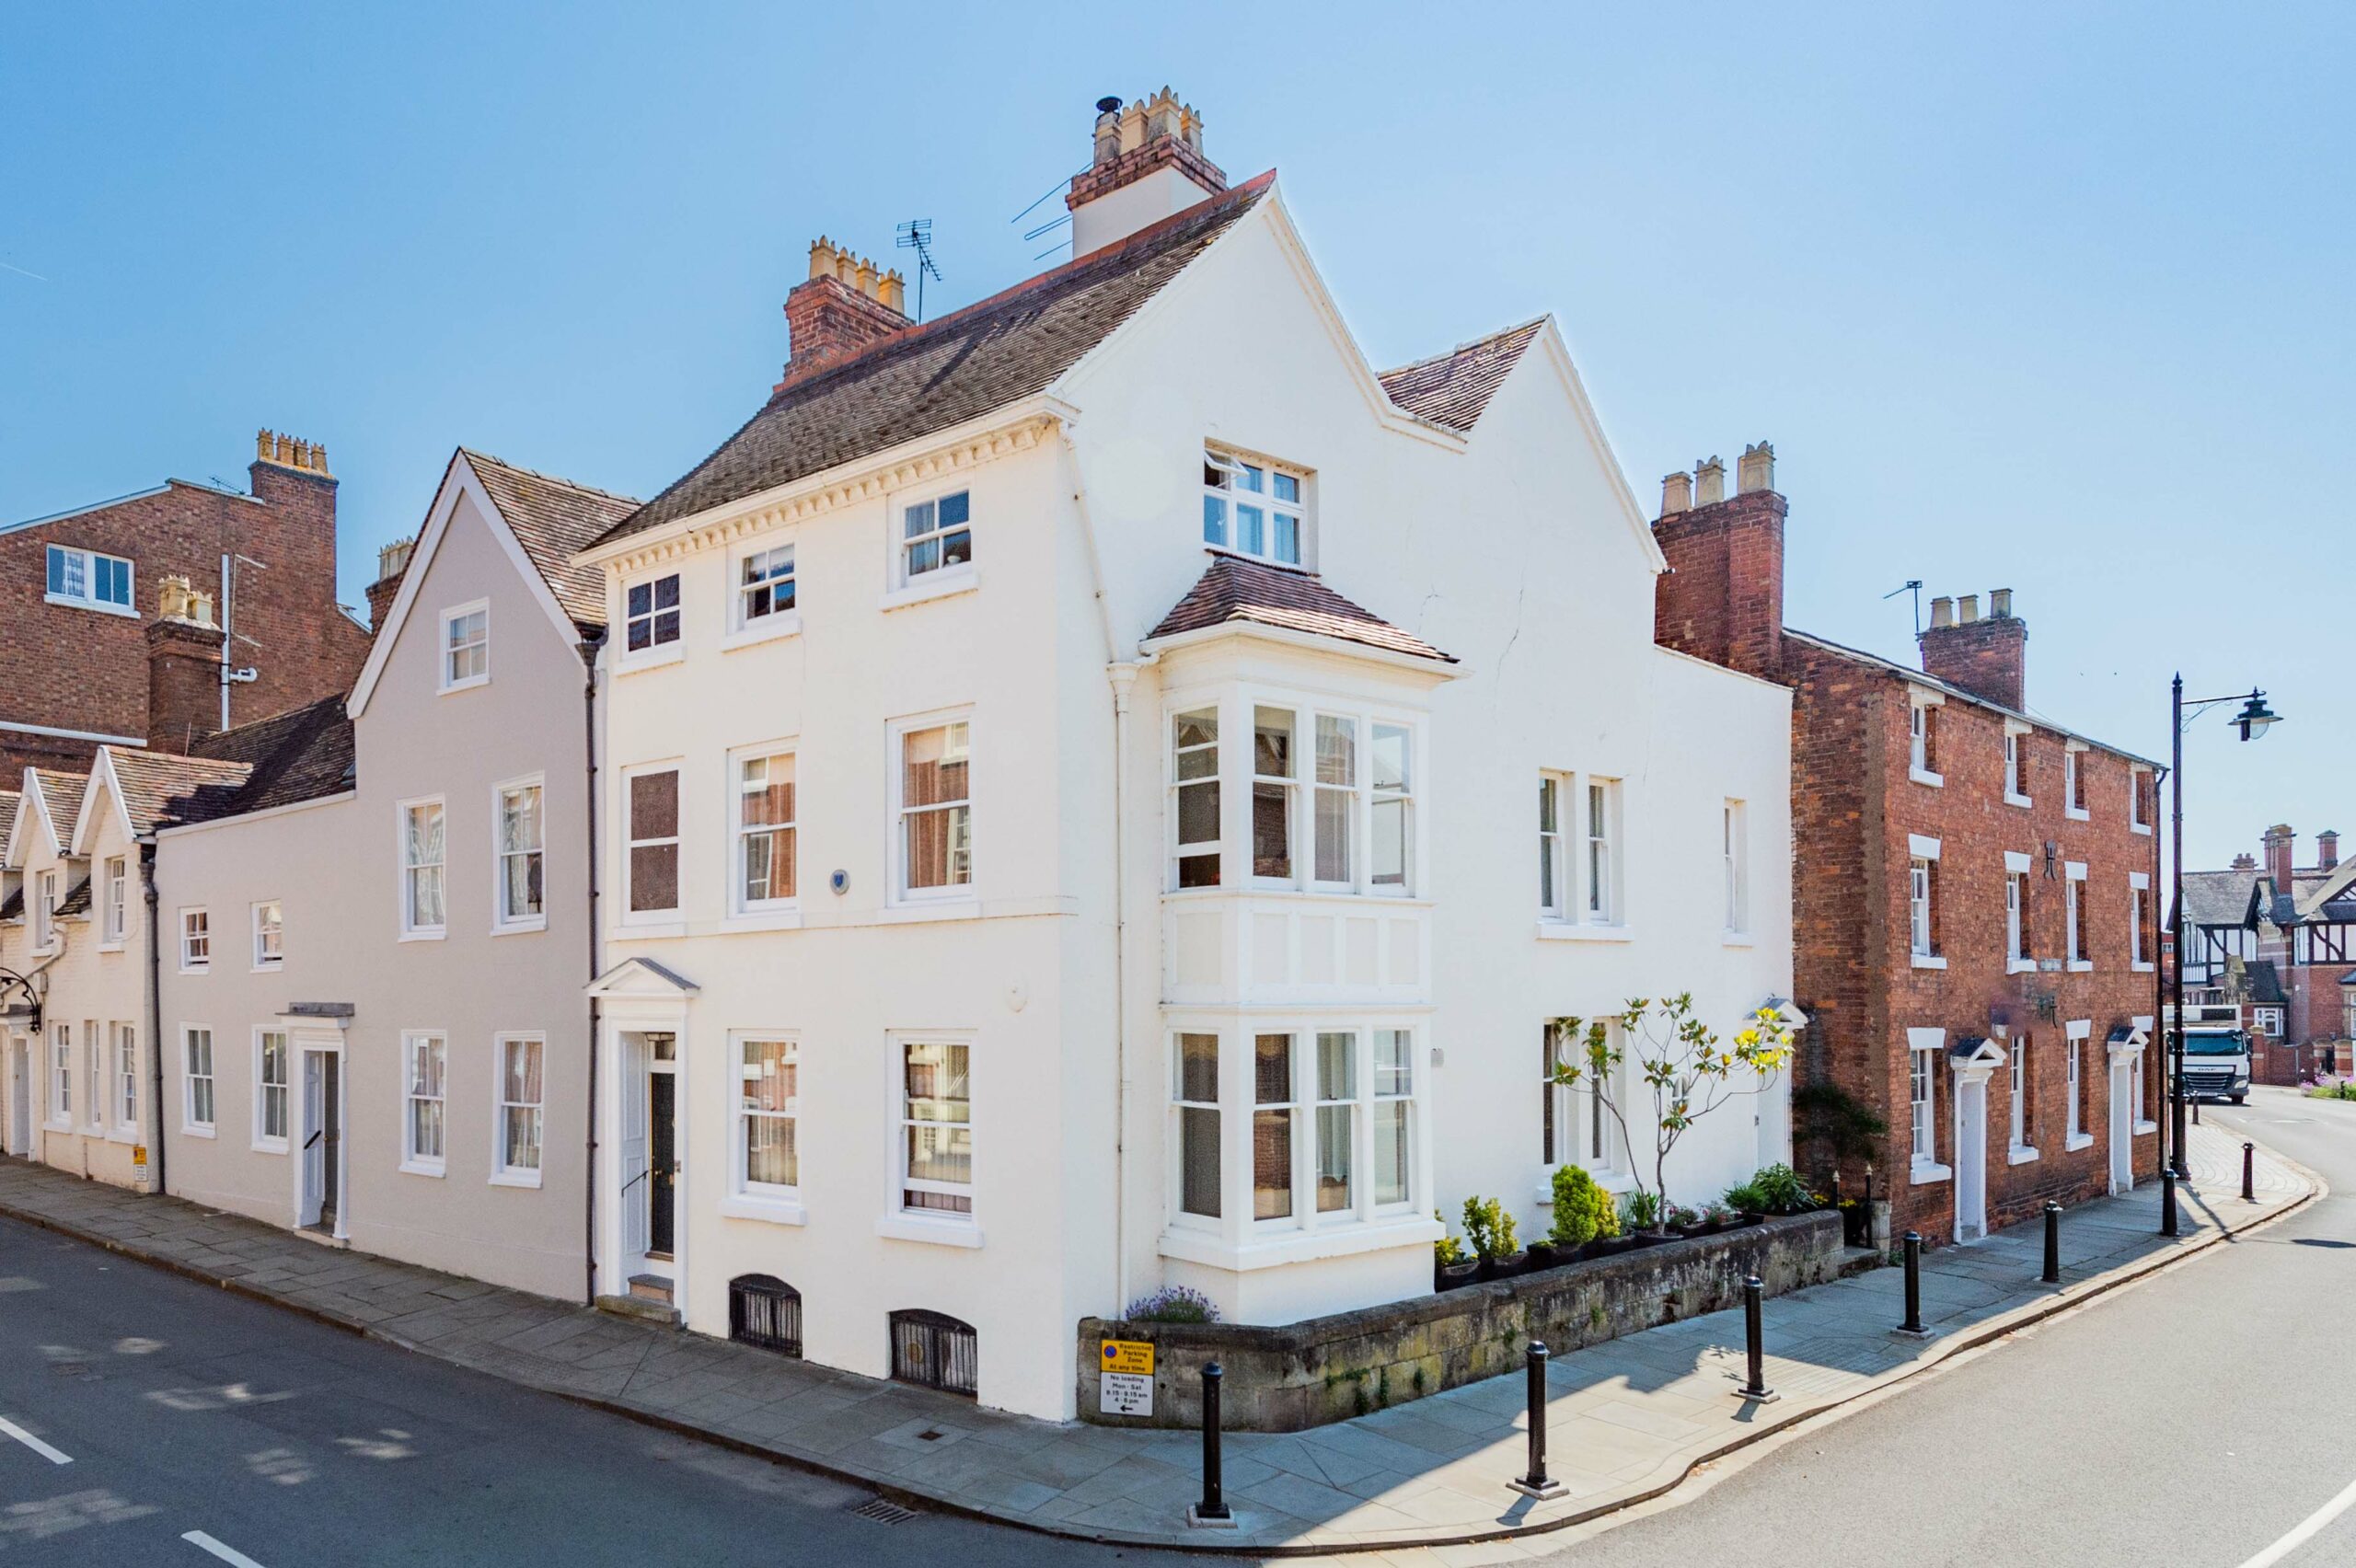 Ormonde House – Prominent period residence in Shrewsbury